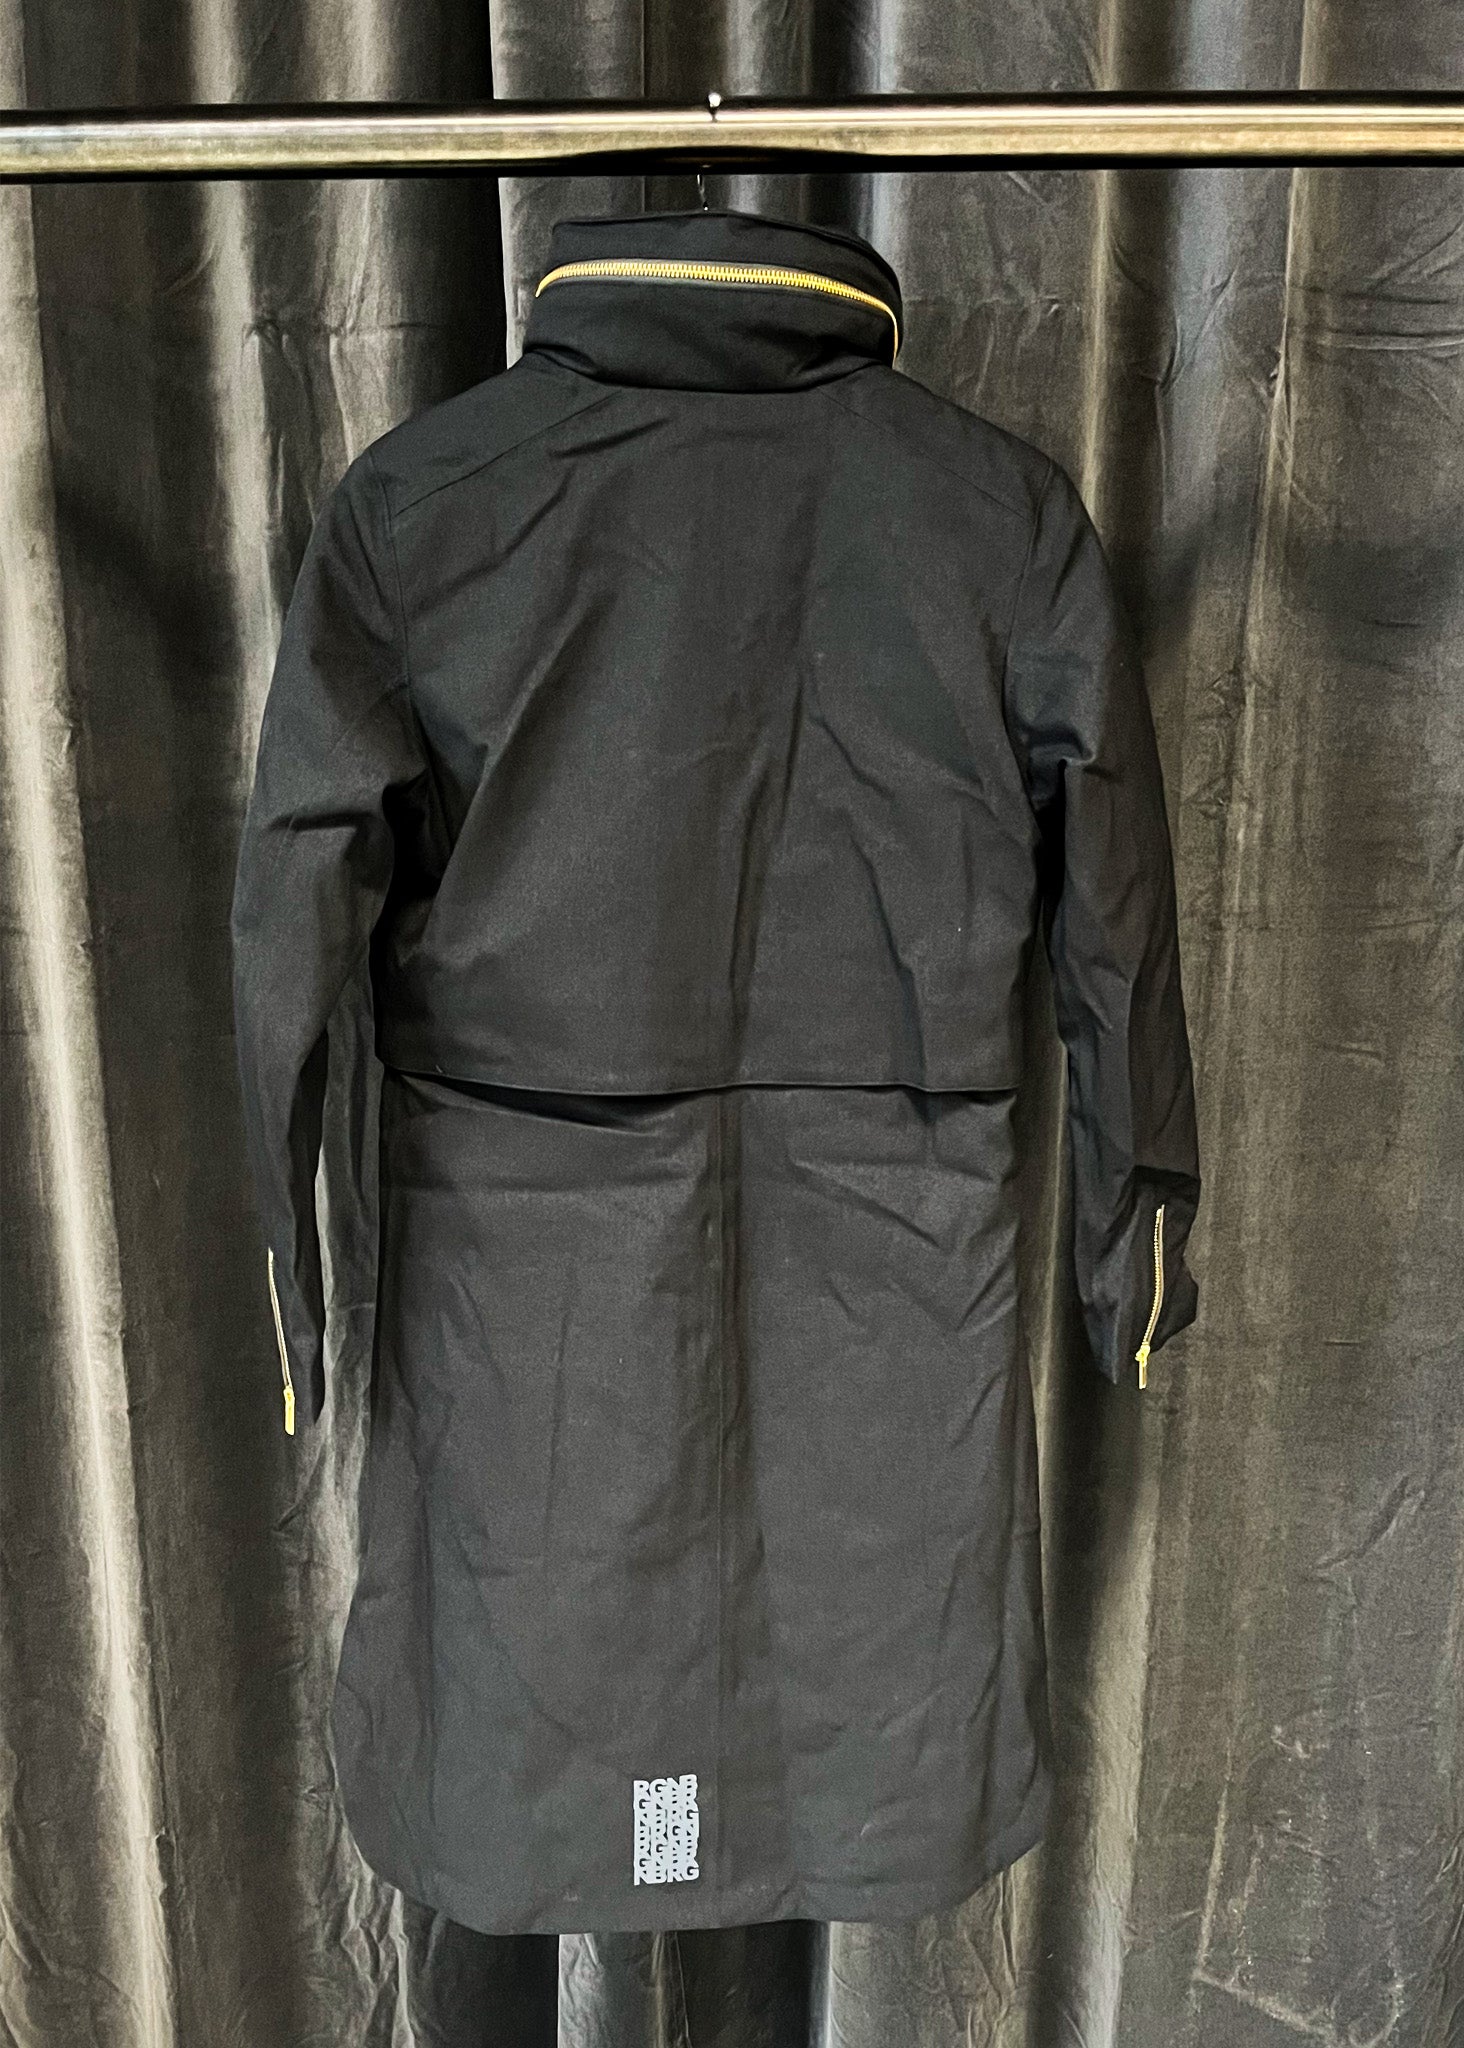 BRGN Second Hand - Regn New Black - XS